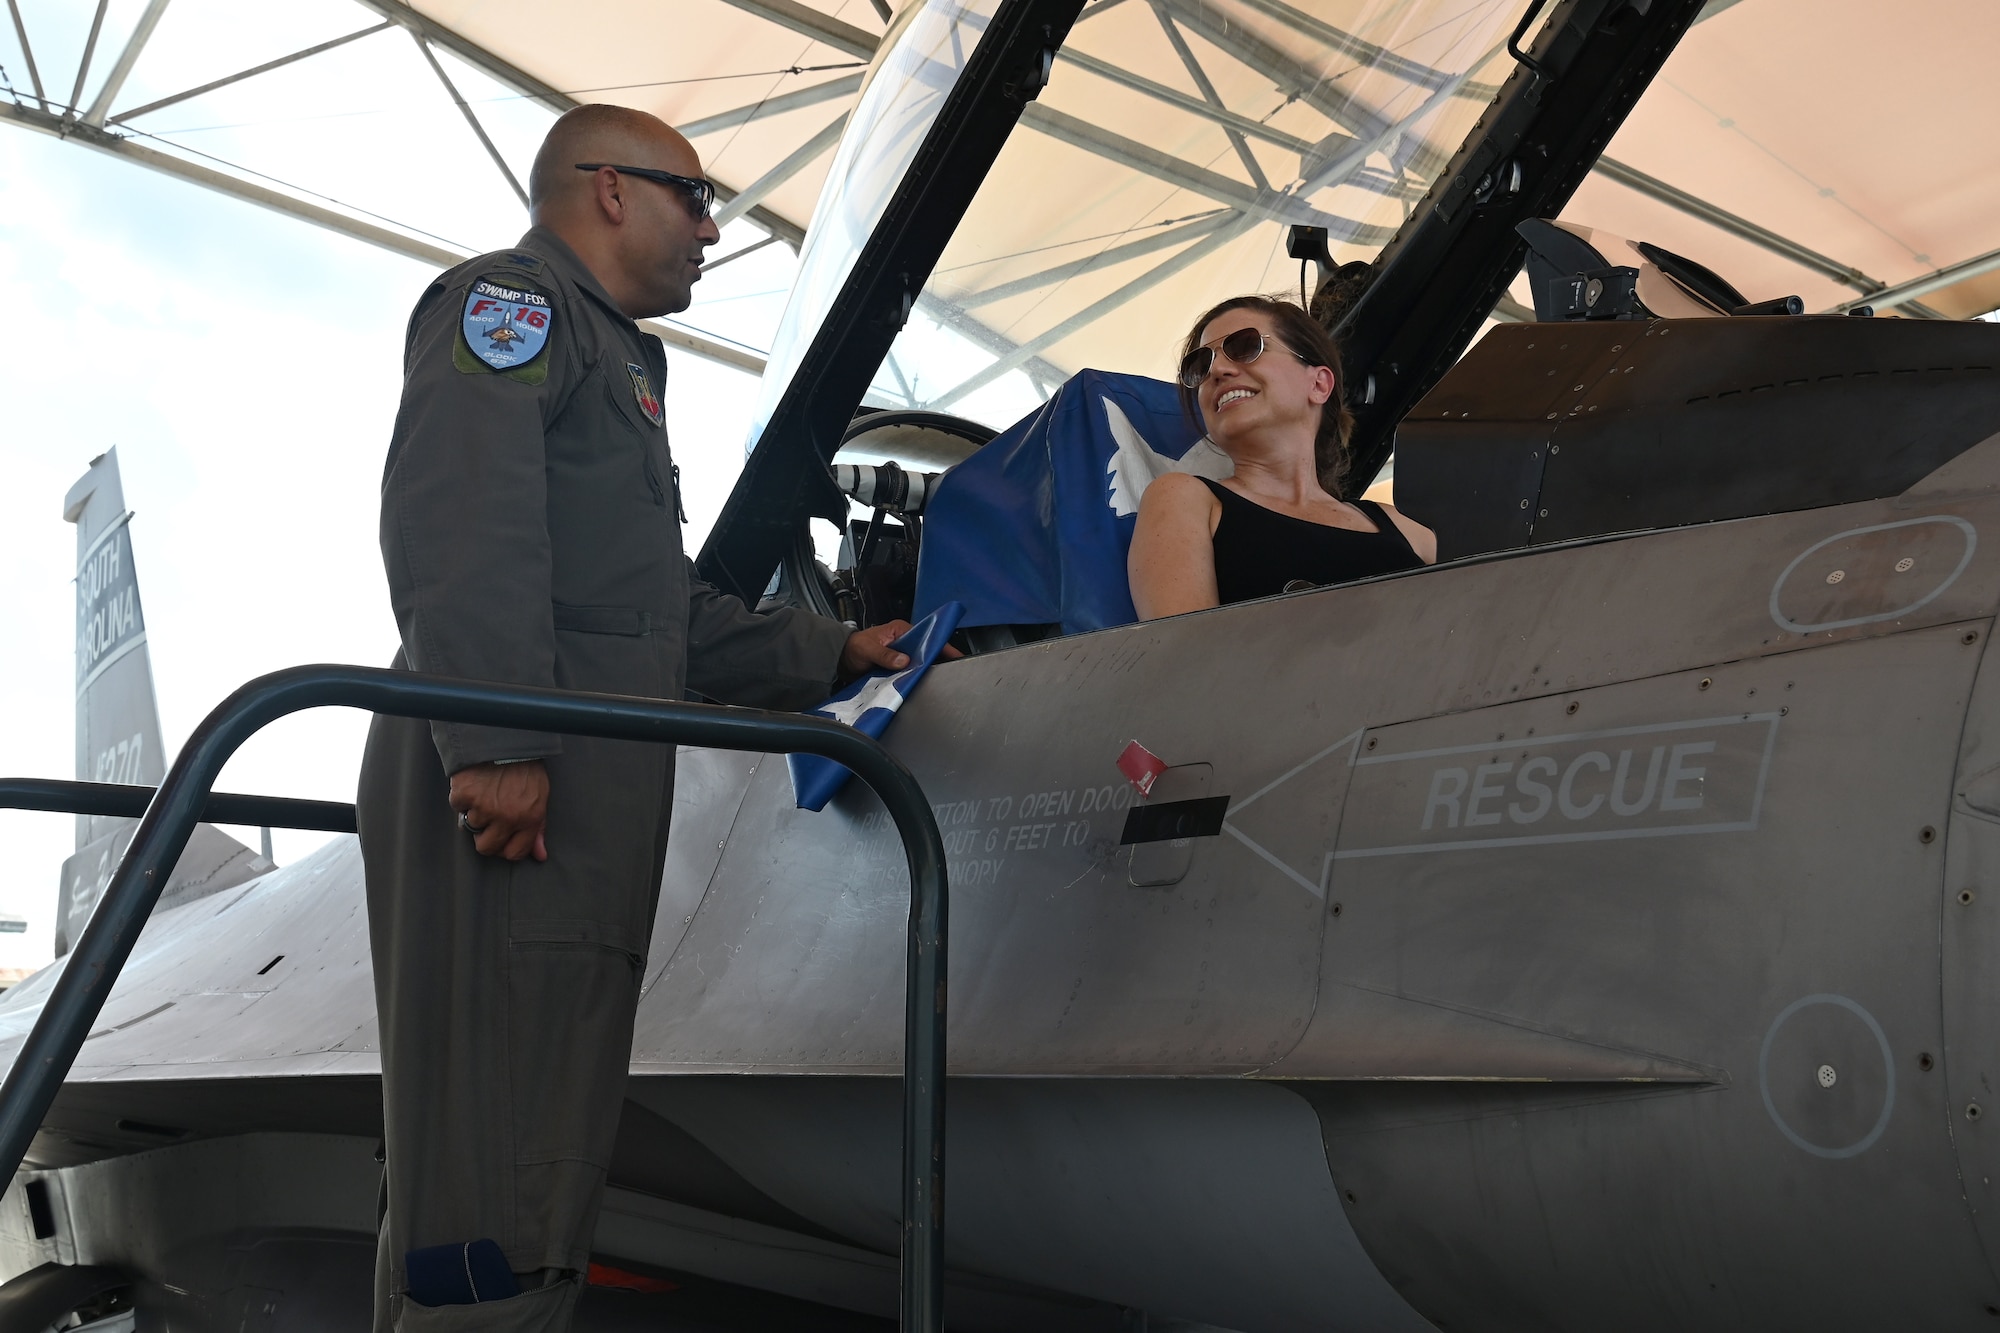 U.S. Rep. Nancy Mace from Charleston, South Carolina speaks with South Carolina National Guard senior leadership during her visit to McEntire Joint National Guard Base, South Carolina Aug.19, 2021. U.S. Air Force Col. Akshai Gandhi, 169th Fighter Wing commander provides Mace a close-up inspection of an F-16 Fighting Falcon jet. The purpose of her visit is to meet with South Carolina National Guard leadership to discuss the current state of the South Carolina National Guard and future endeavors for the organization as well as a familiarization of the base and the capabilities of the units housed there. (U.S. Air National Guard photo by Senior Master Sgt. Edward Snyder, 169th Fighter Wing Public Affairs)